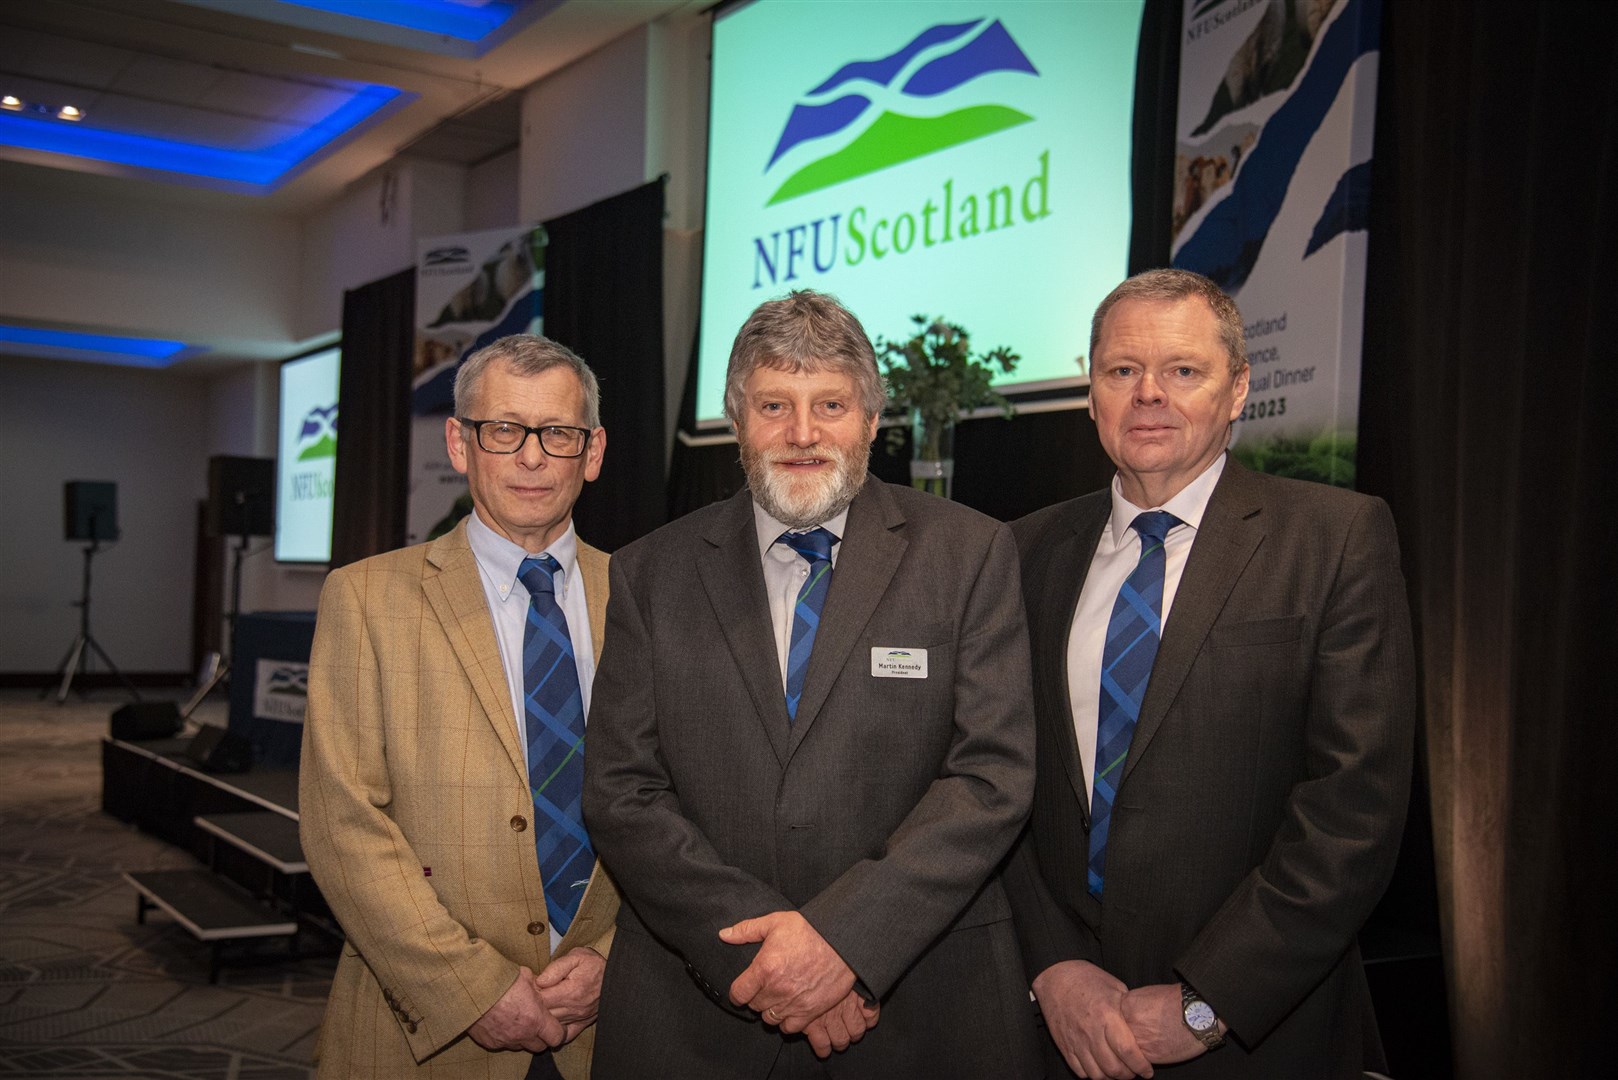 President Martin Kennedy (centre), vice-preisndent Andrew Connon (right) and newly elected vice-president, Alasdair Macnab.